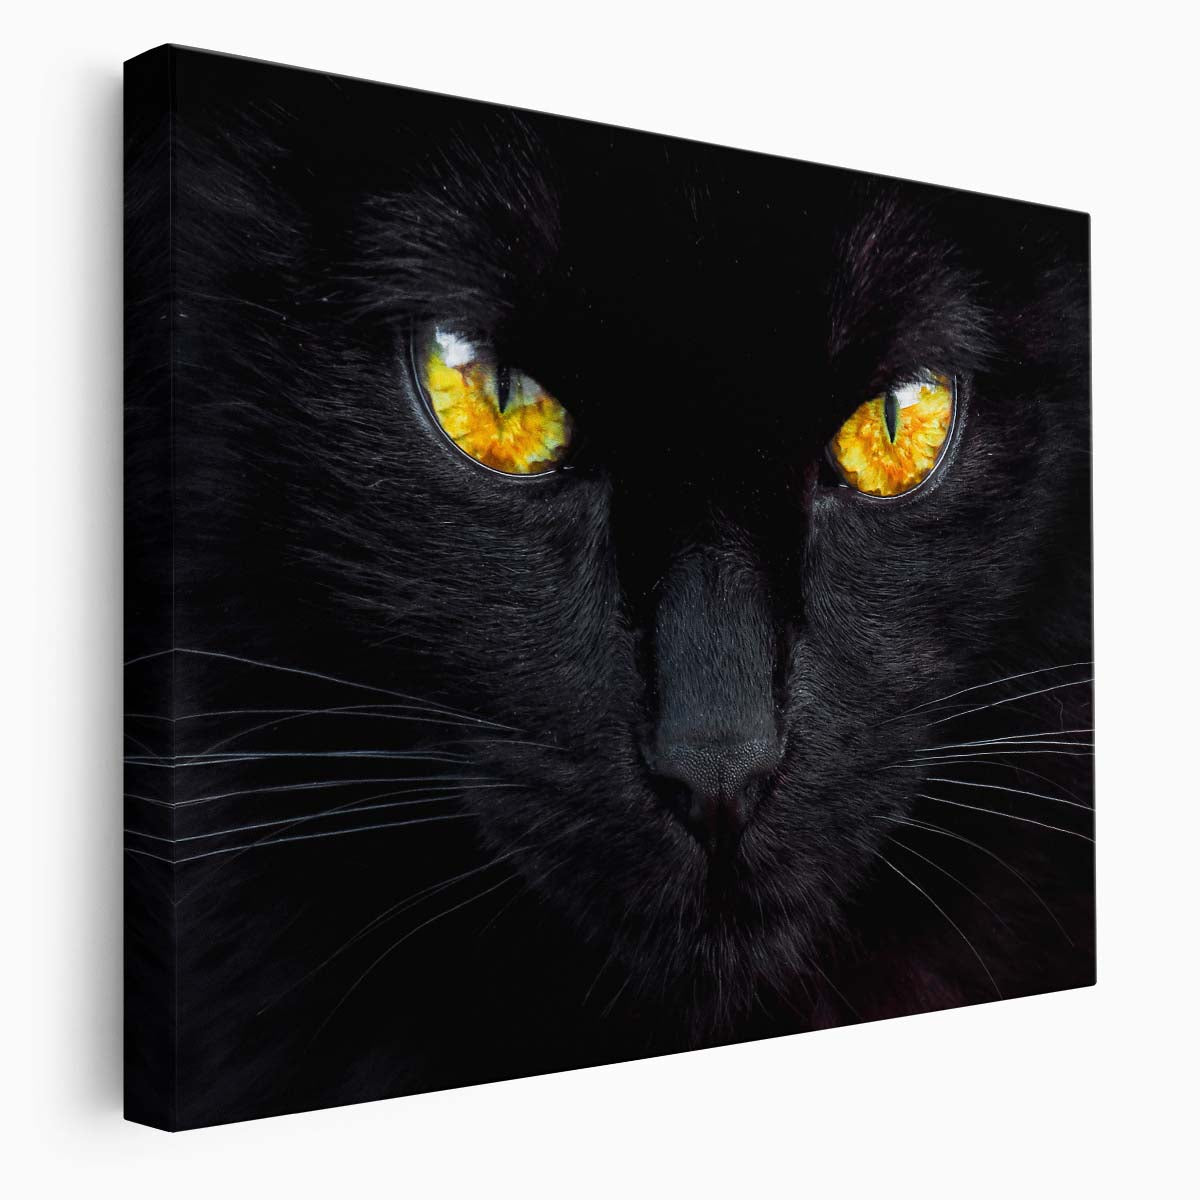 Hypnotic Gaze Black Cat Yellow Eyes Wall Art by Luxuriance Designs. Made in USA.